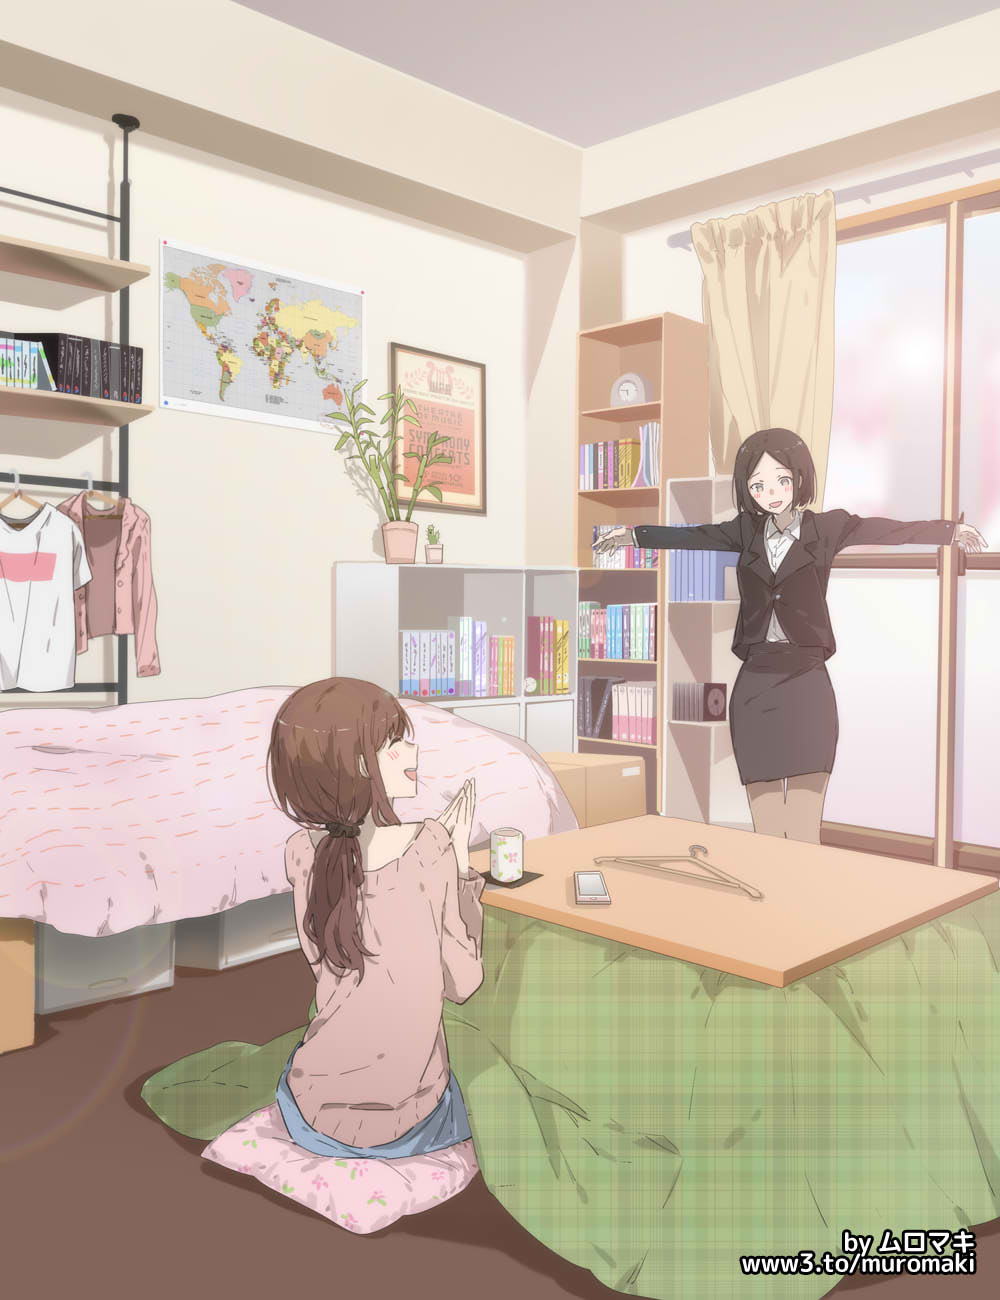 2girls aran_sweater artist_name bangs bed bedroom black_skirt blanket blush bob_cut book bookshelf box cardboard_box cd clapping clock closed_eyes clothes clothes_hanger cup curtains formal highres indoors kotatsu looking_at_another low_ponytail map multiple_girls muromaki office_lady original pantyhose parted_bangs phone pillow pink_sweater plant poster_(object) potted_plant shirt short_hair skirt skirt_suit sliding_doors smile suit sweater table teacup watermark web_address white_shirt window world_map